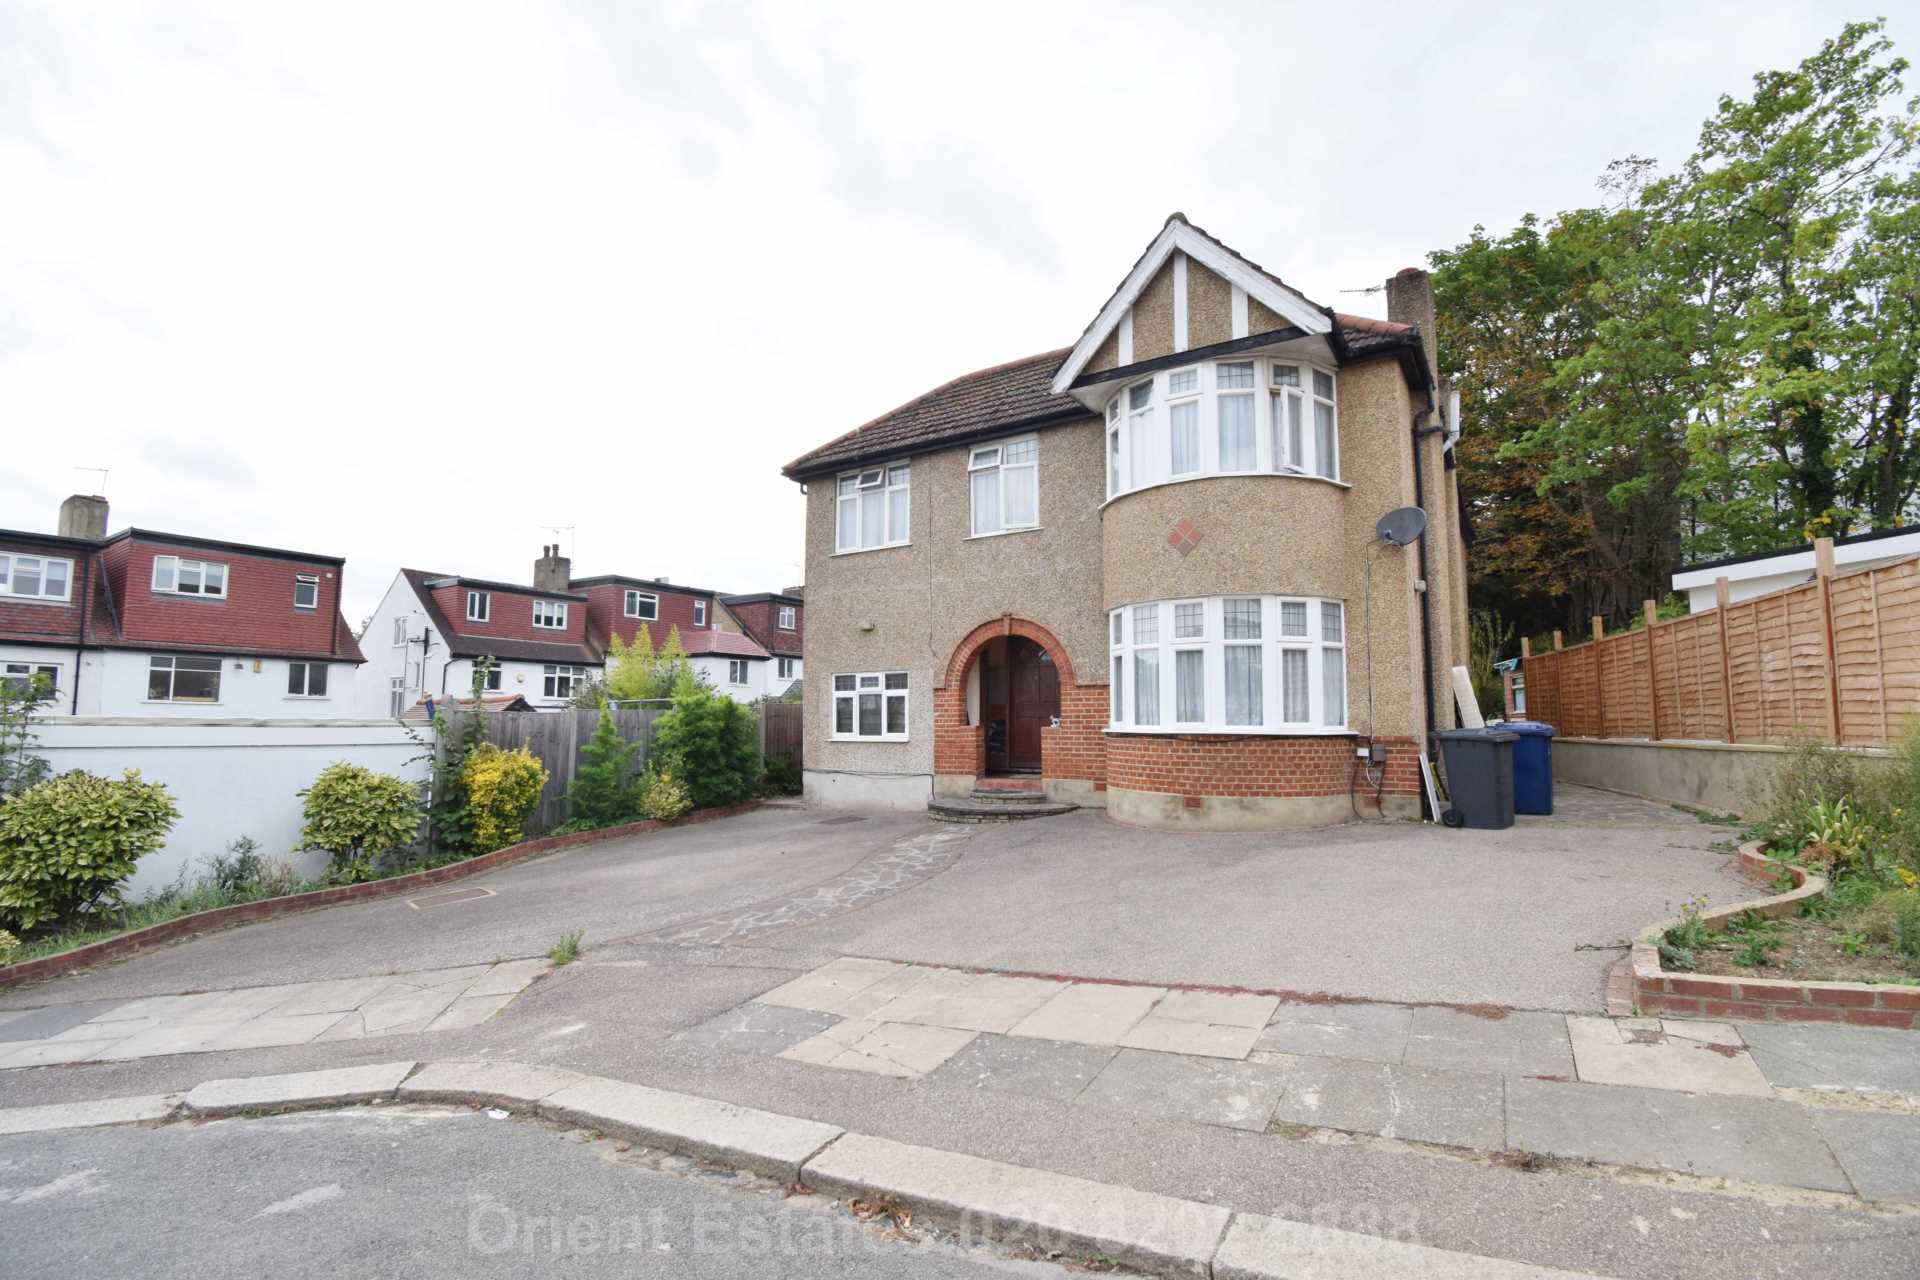 5 bedroom detached house for sale in London